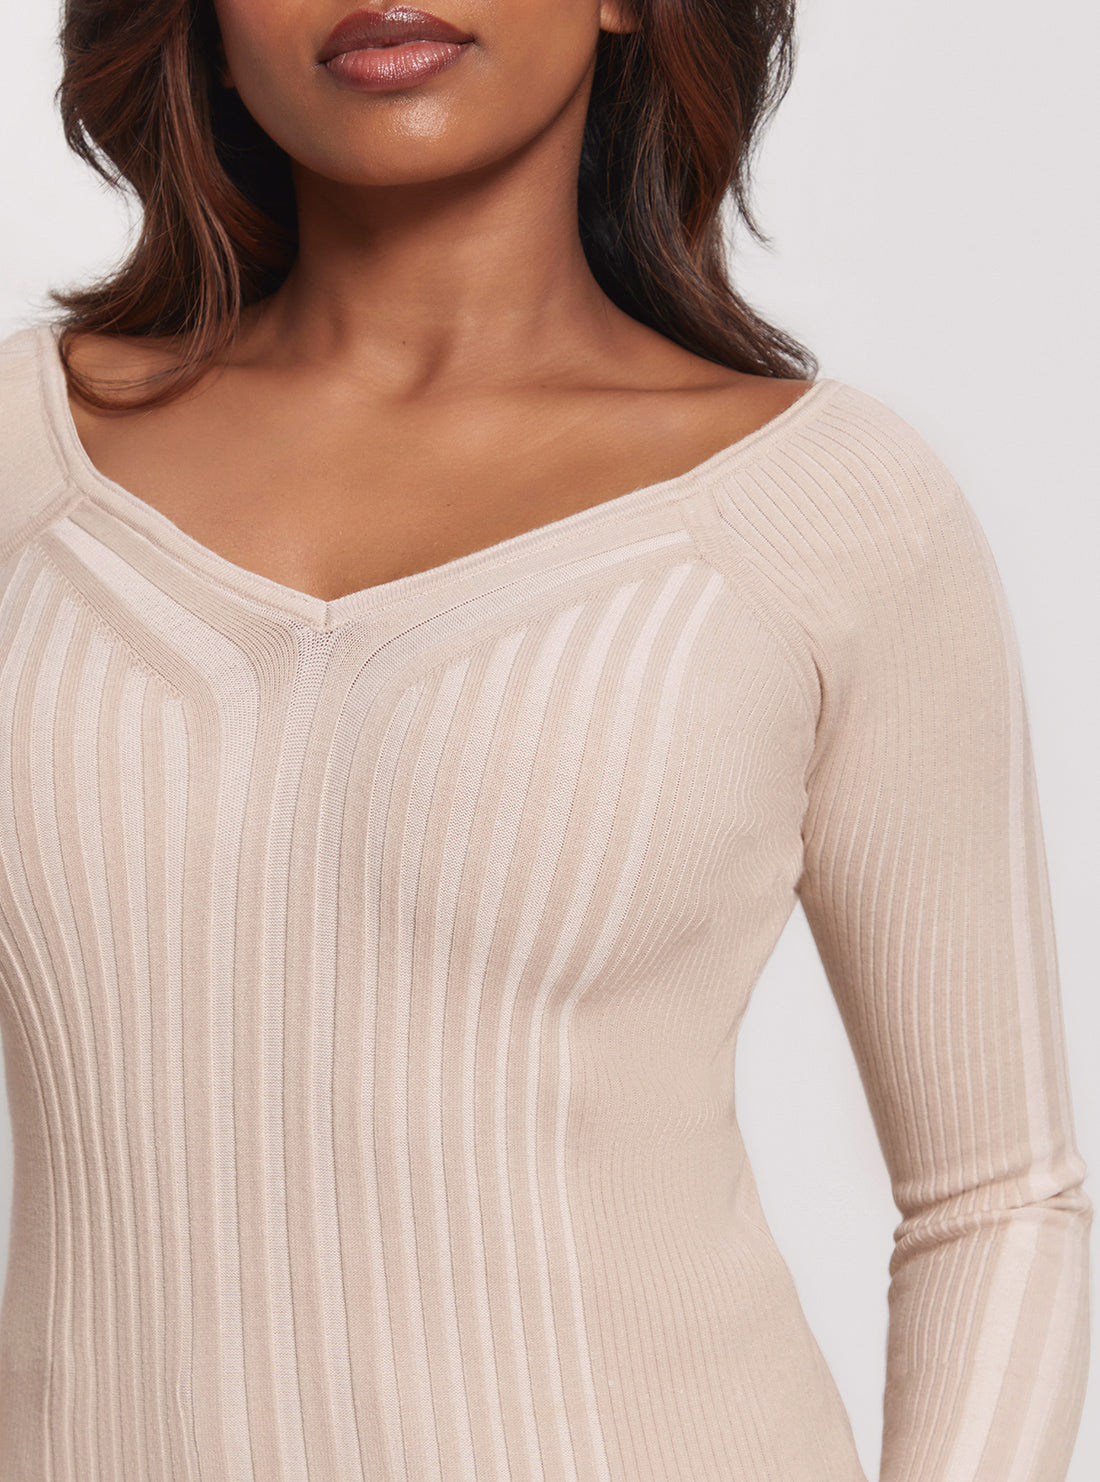 GUESS Beige Allie Long Sleeve Knit Top detail view